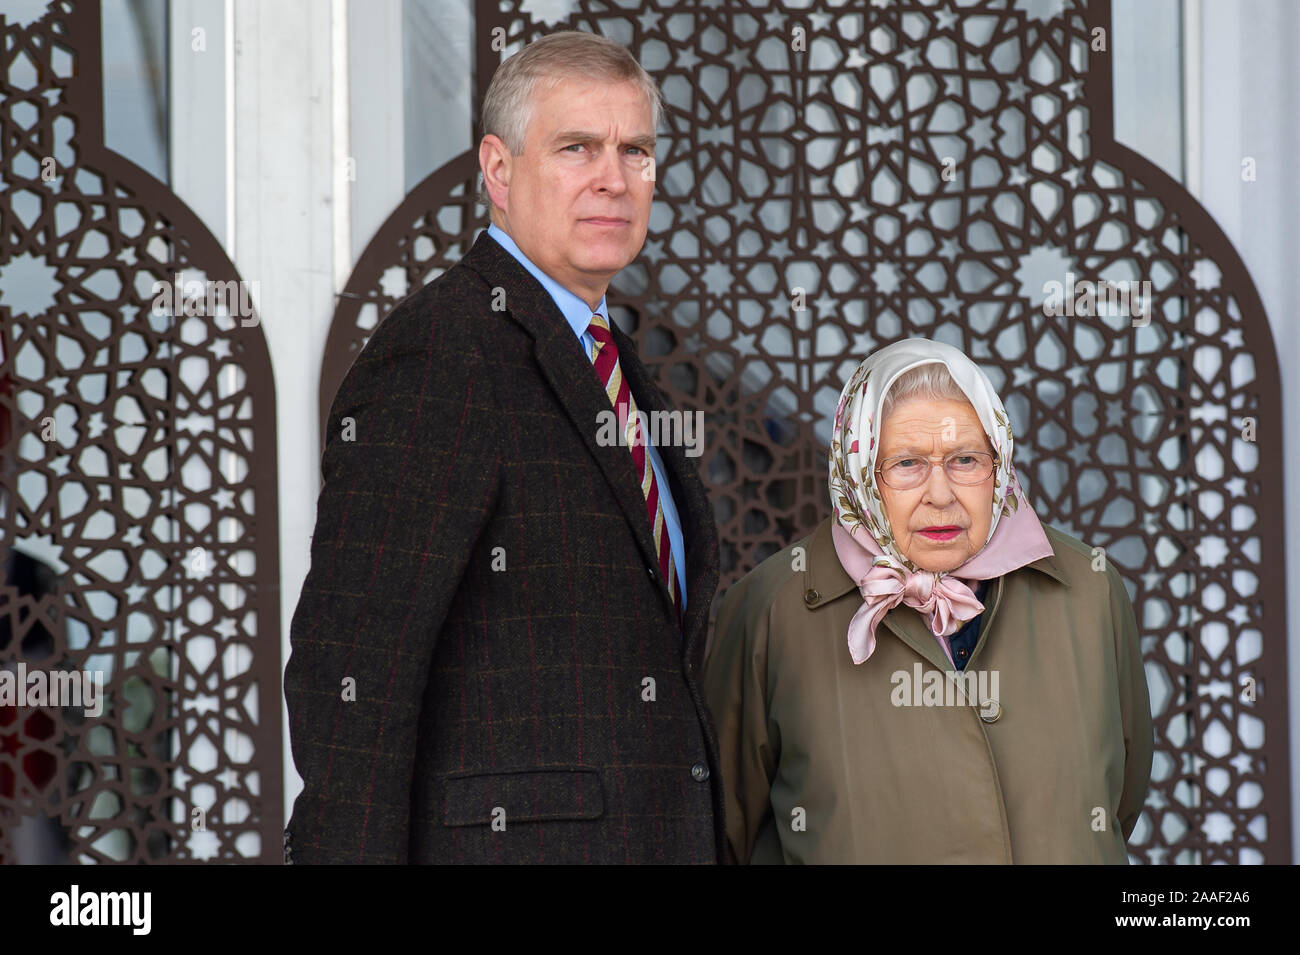 Royal Windsor Endurance, Windsor Great Park, Berkshire, UK. 12th May, 2017. Her Majesty the Queen and her son Prince Andrew, Duke of York watch the Royal Windsor Endurance riders and their horses at the Vet Gates. Credit: Maureen McLean/Alamy Stock Photo